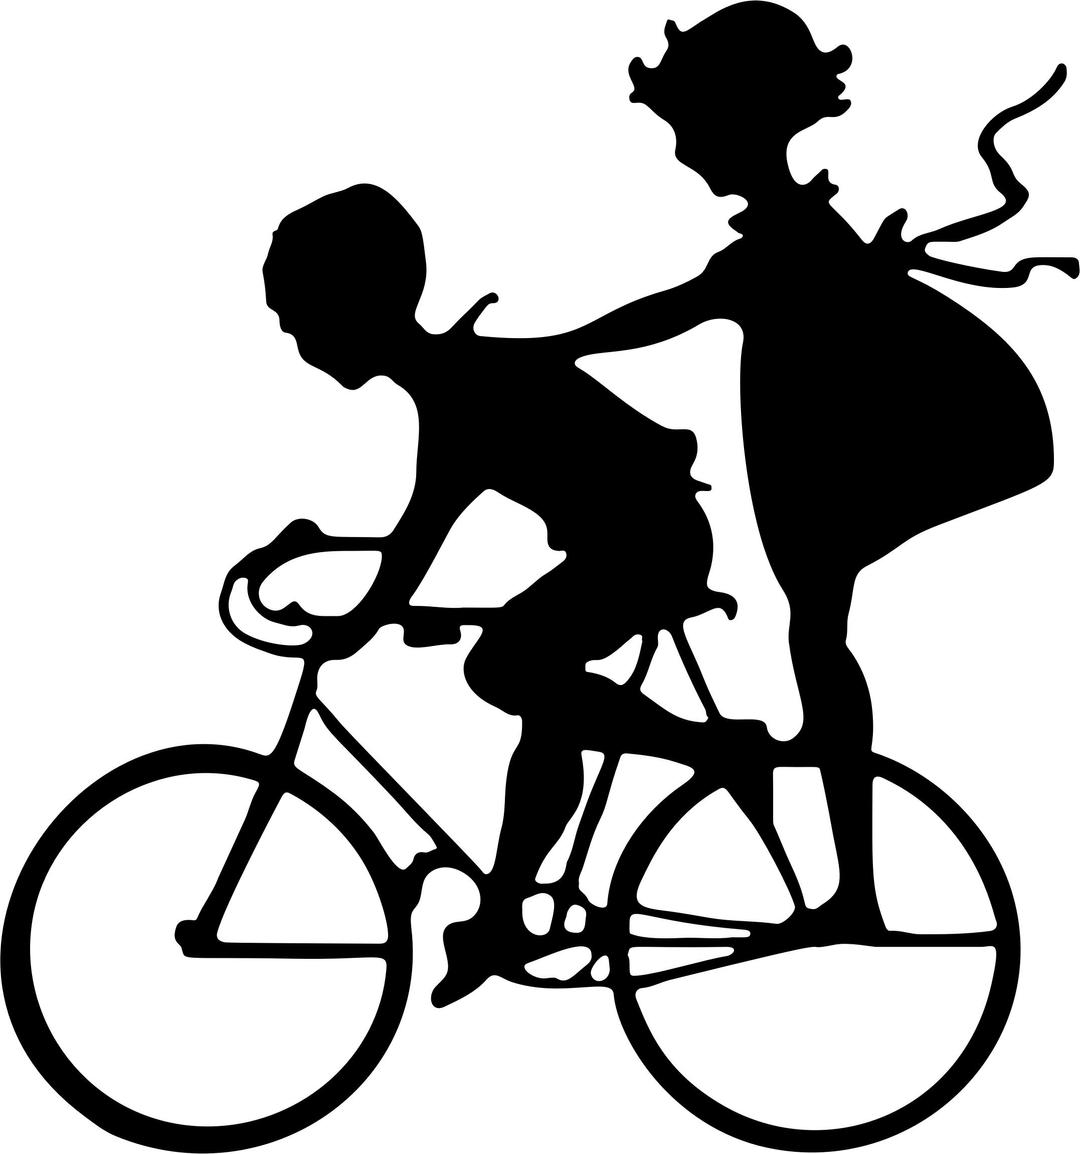 Vintage Brother And Sister Bicycle Silhouette png transparent